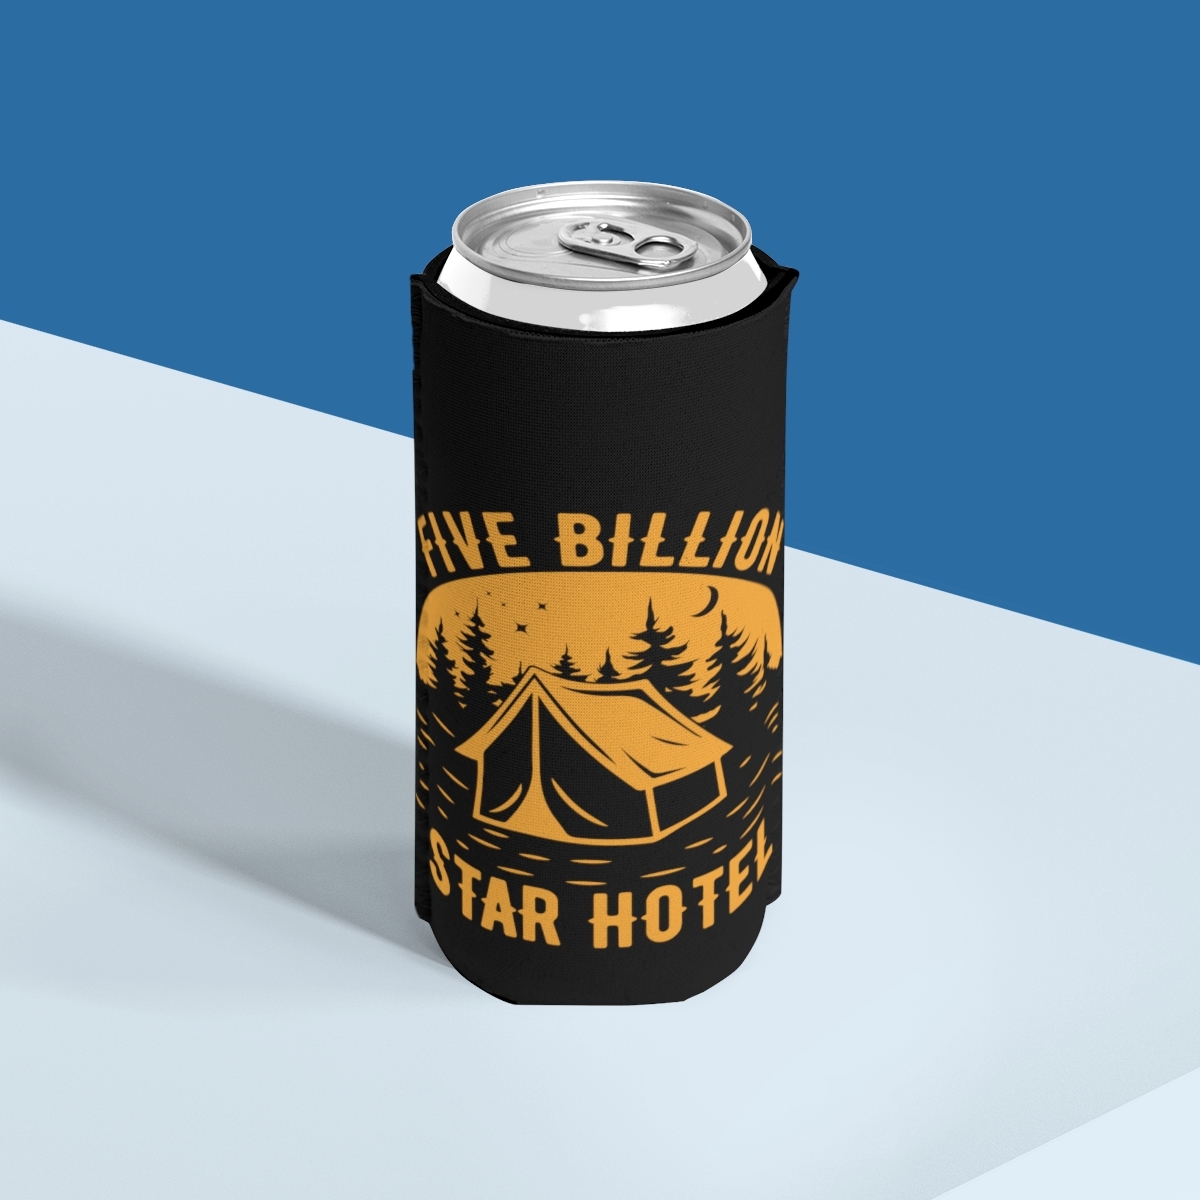 Five Billion Star Hotel Tent Slim Can Cooler | Humorous Graphic | Camping Gift - $15.45